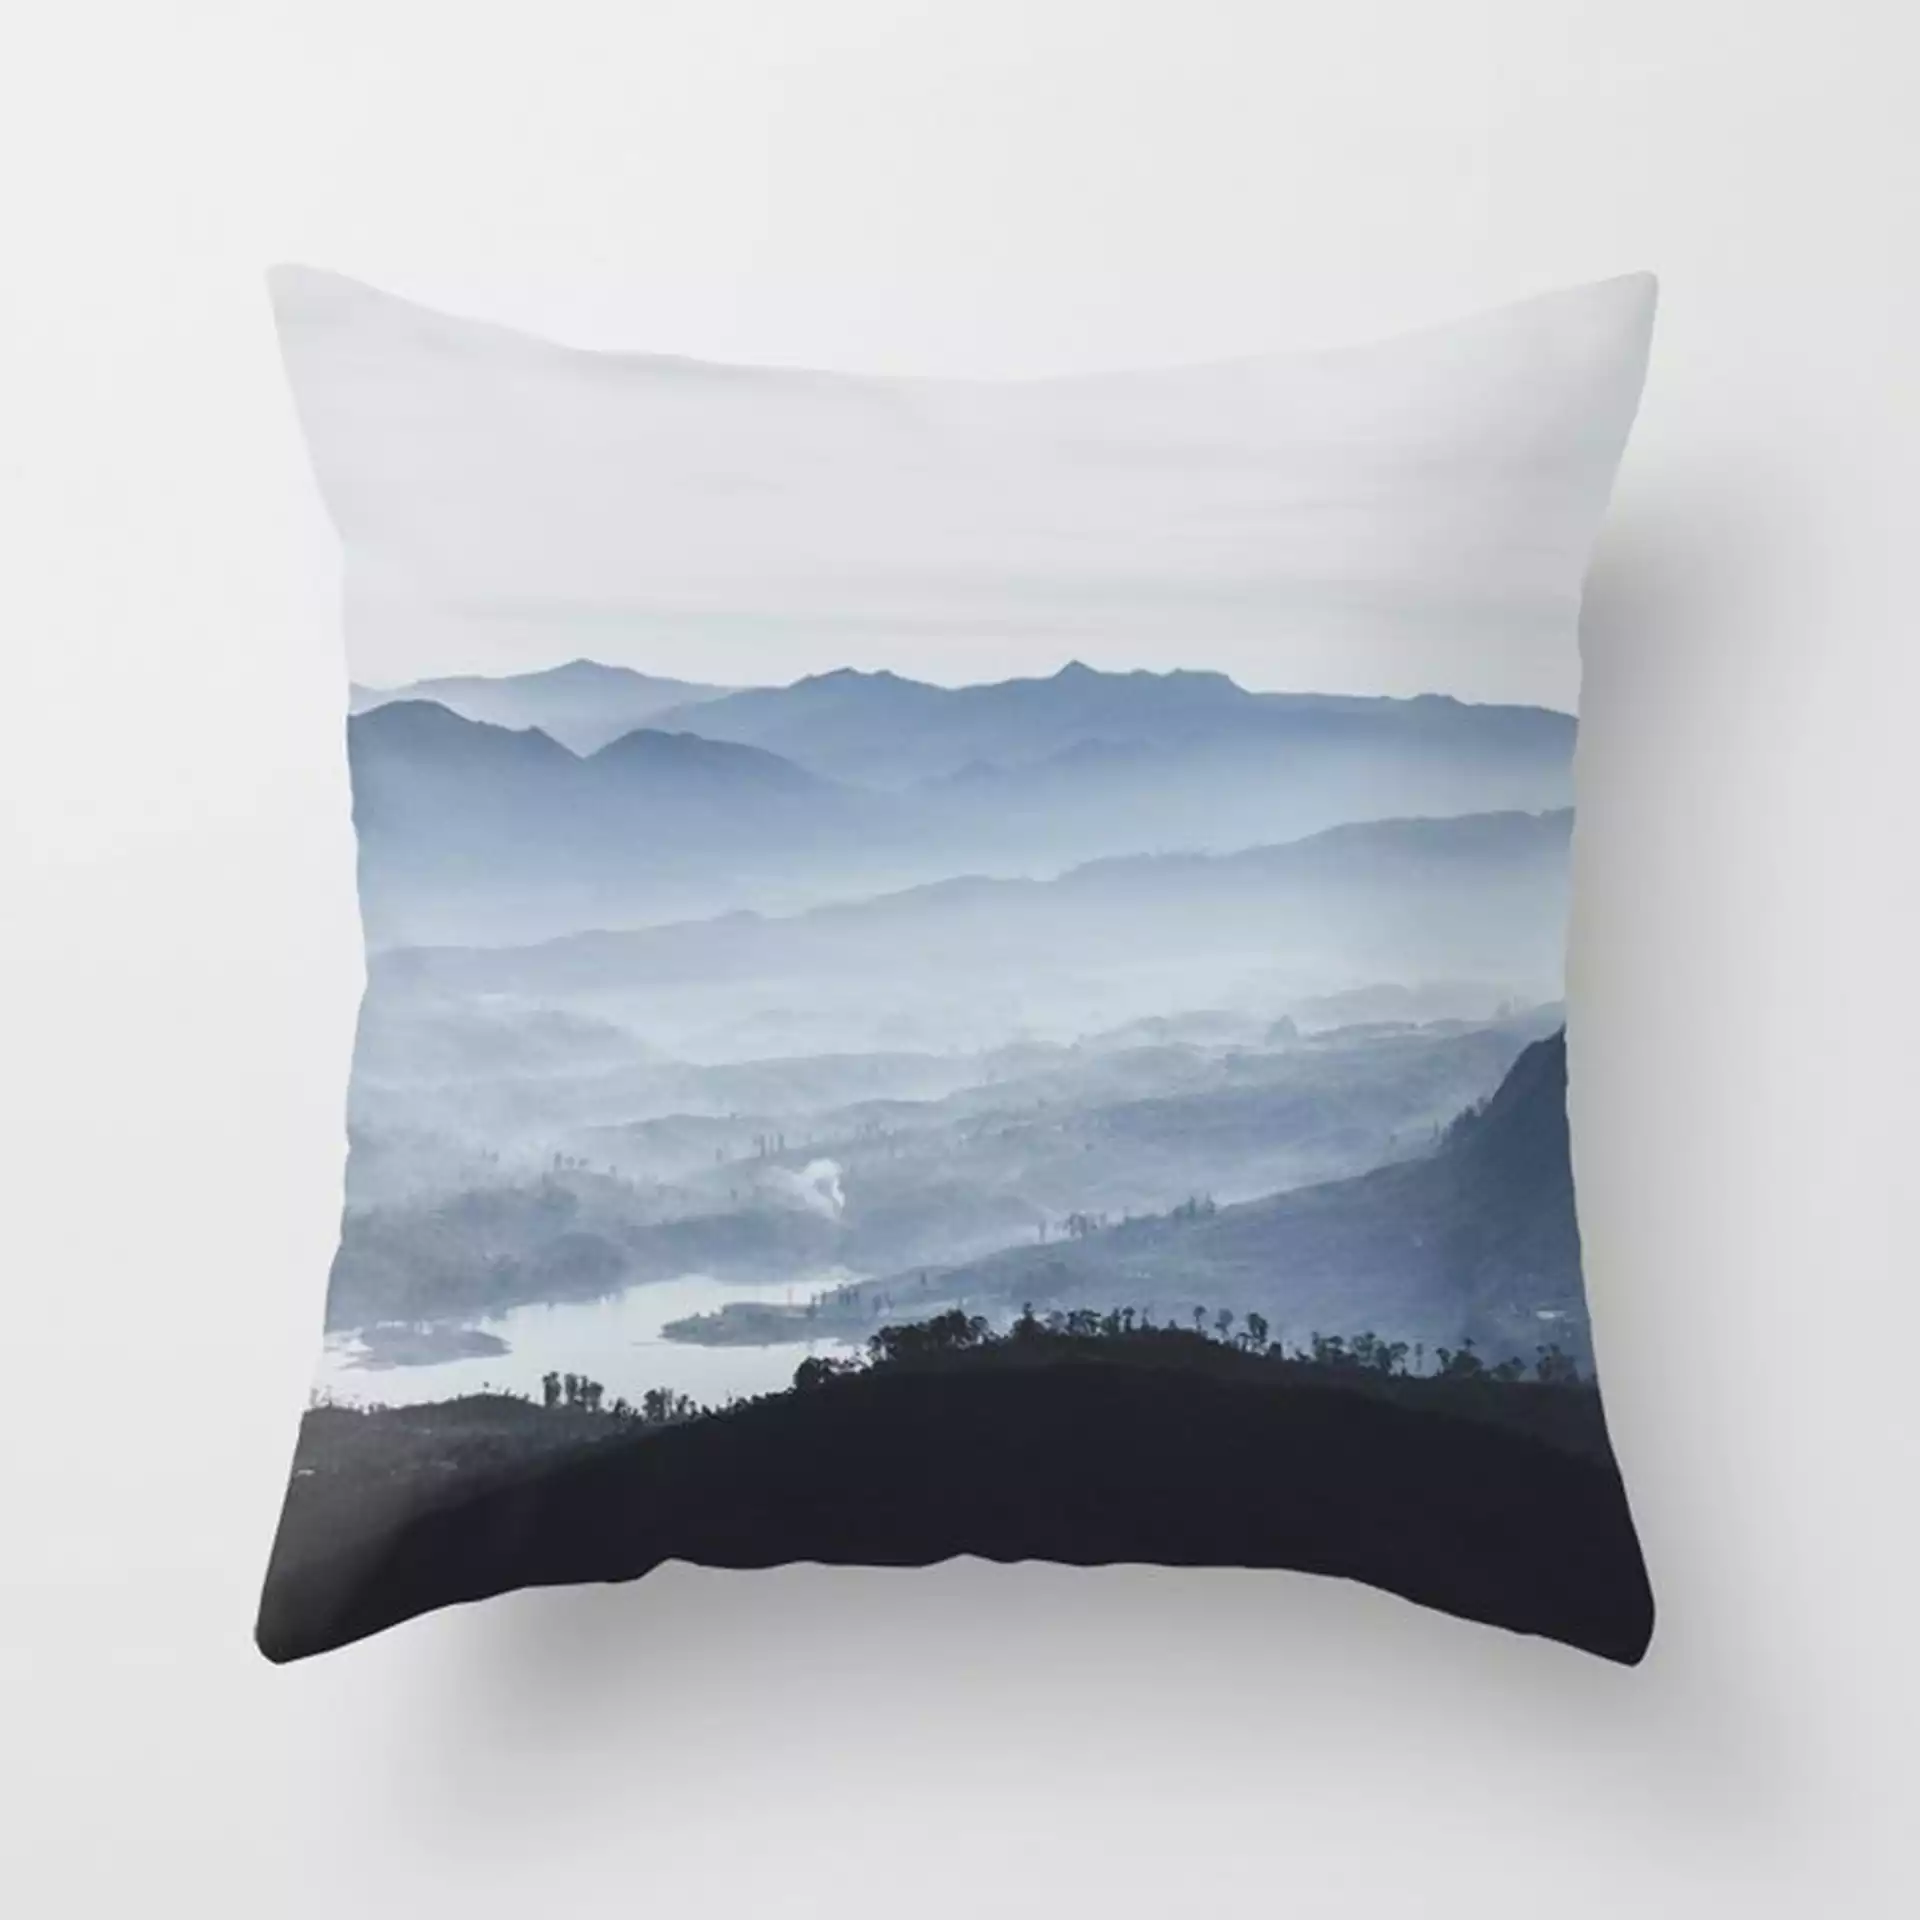 Sri Lanka Couch Throw Pillow by Luke Gram - Cover (24" x 24") with pillow insert - Indoor Pillow